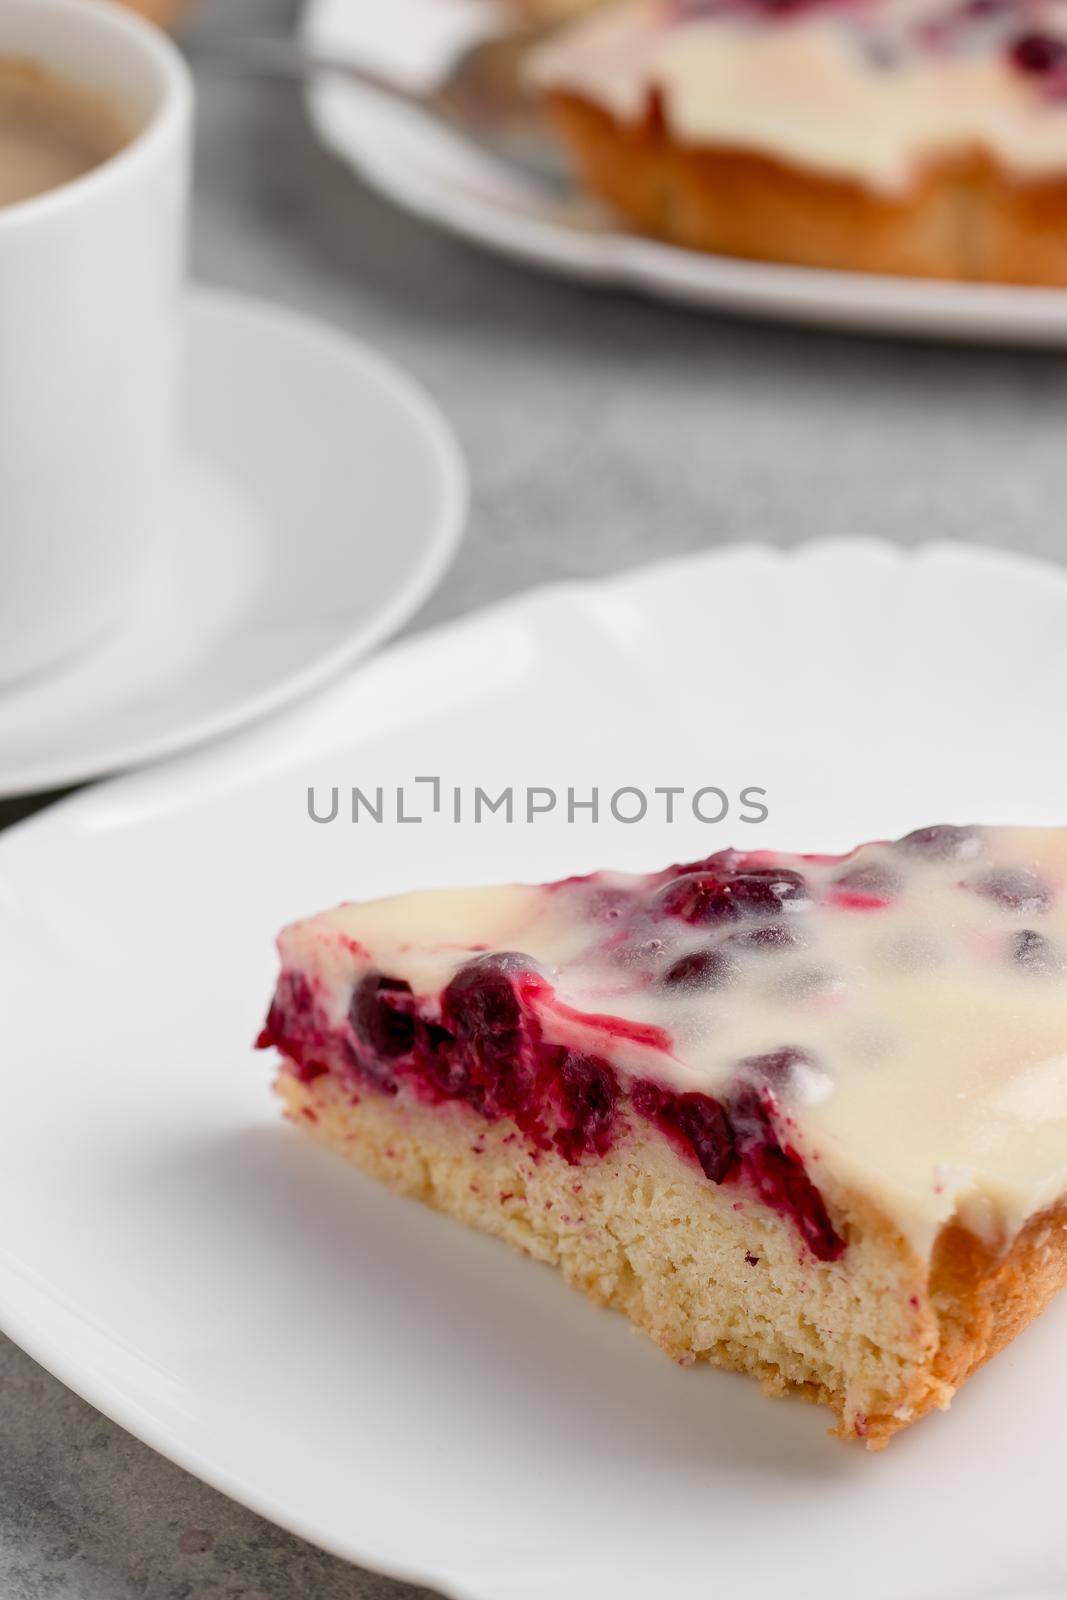 Homemade cake with cranberries and sour cream. Piece of pie close up. Vertical image by galsand